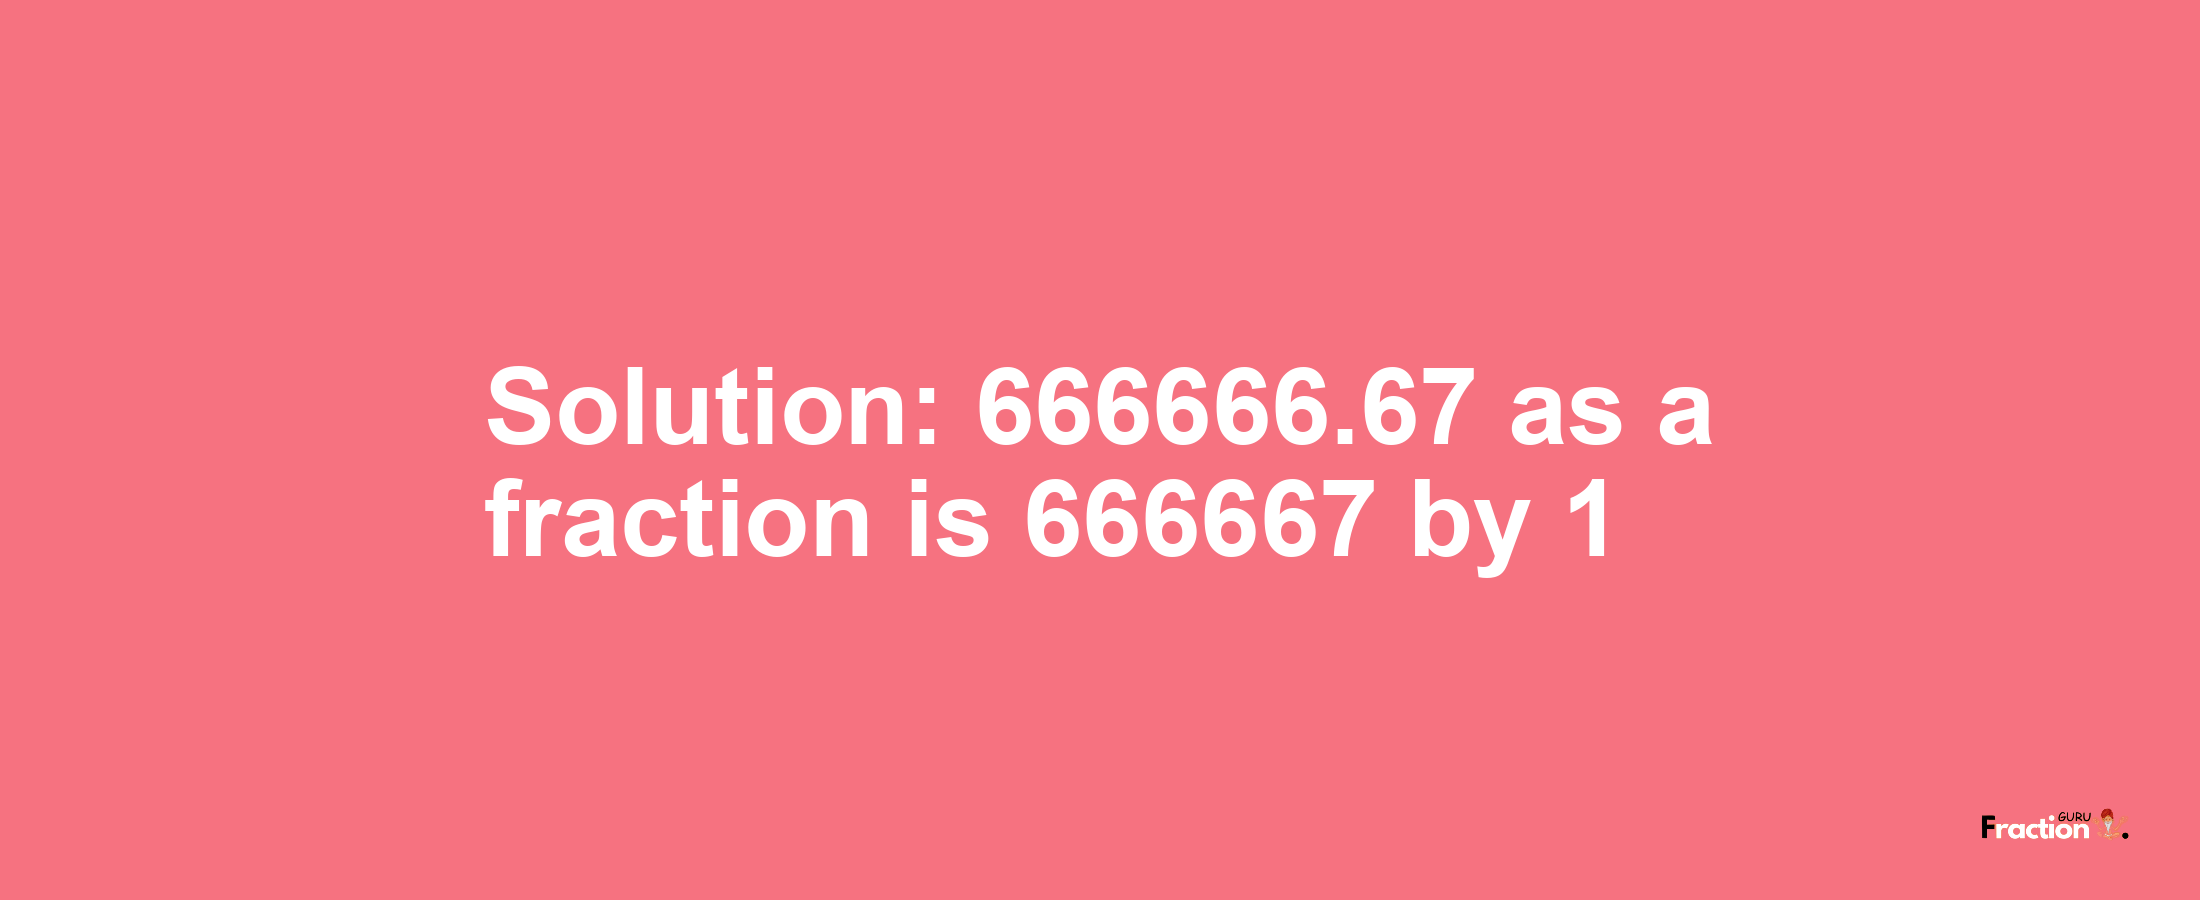 Solution:666666.67 as a fraction is 666667/1